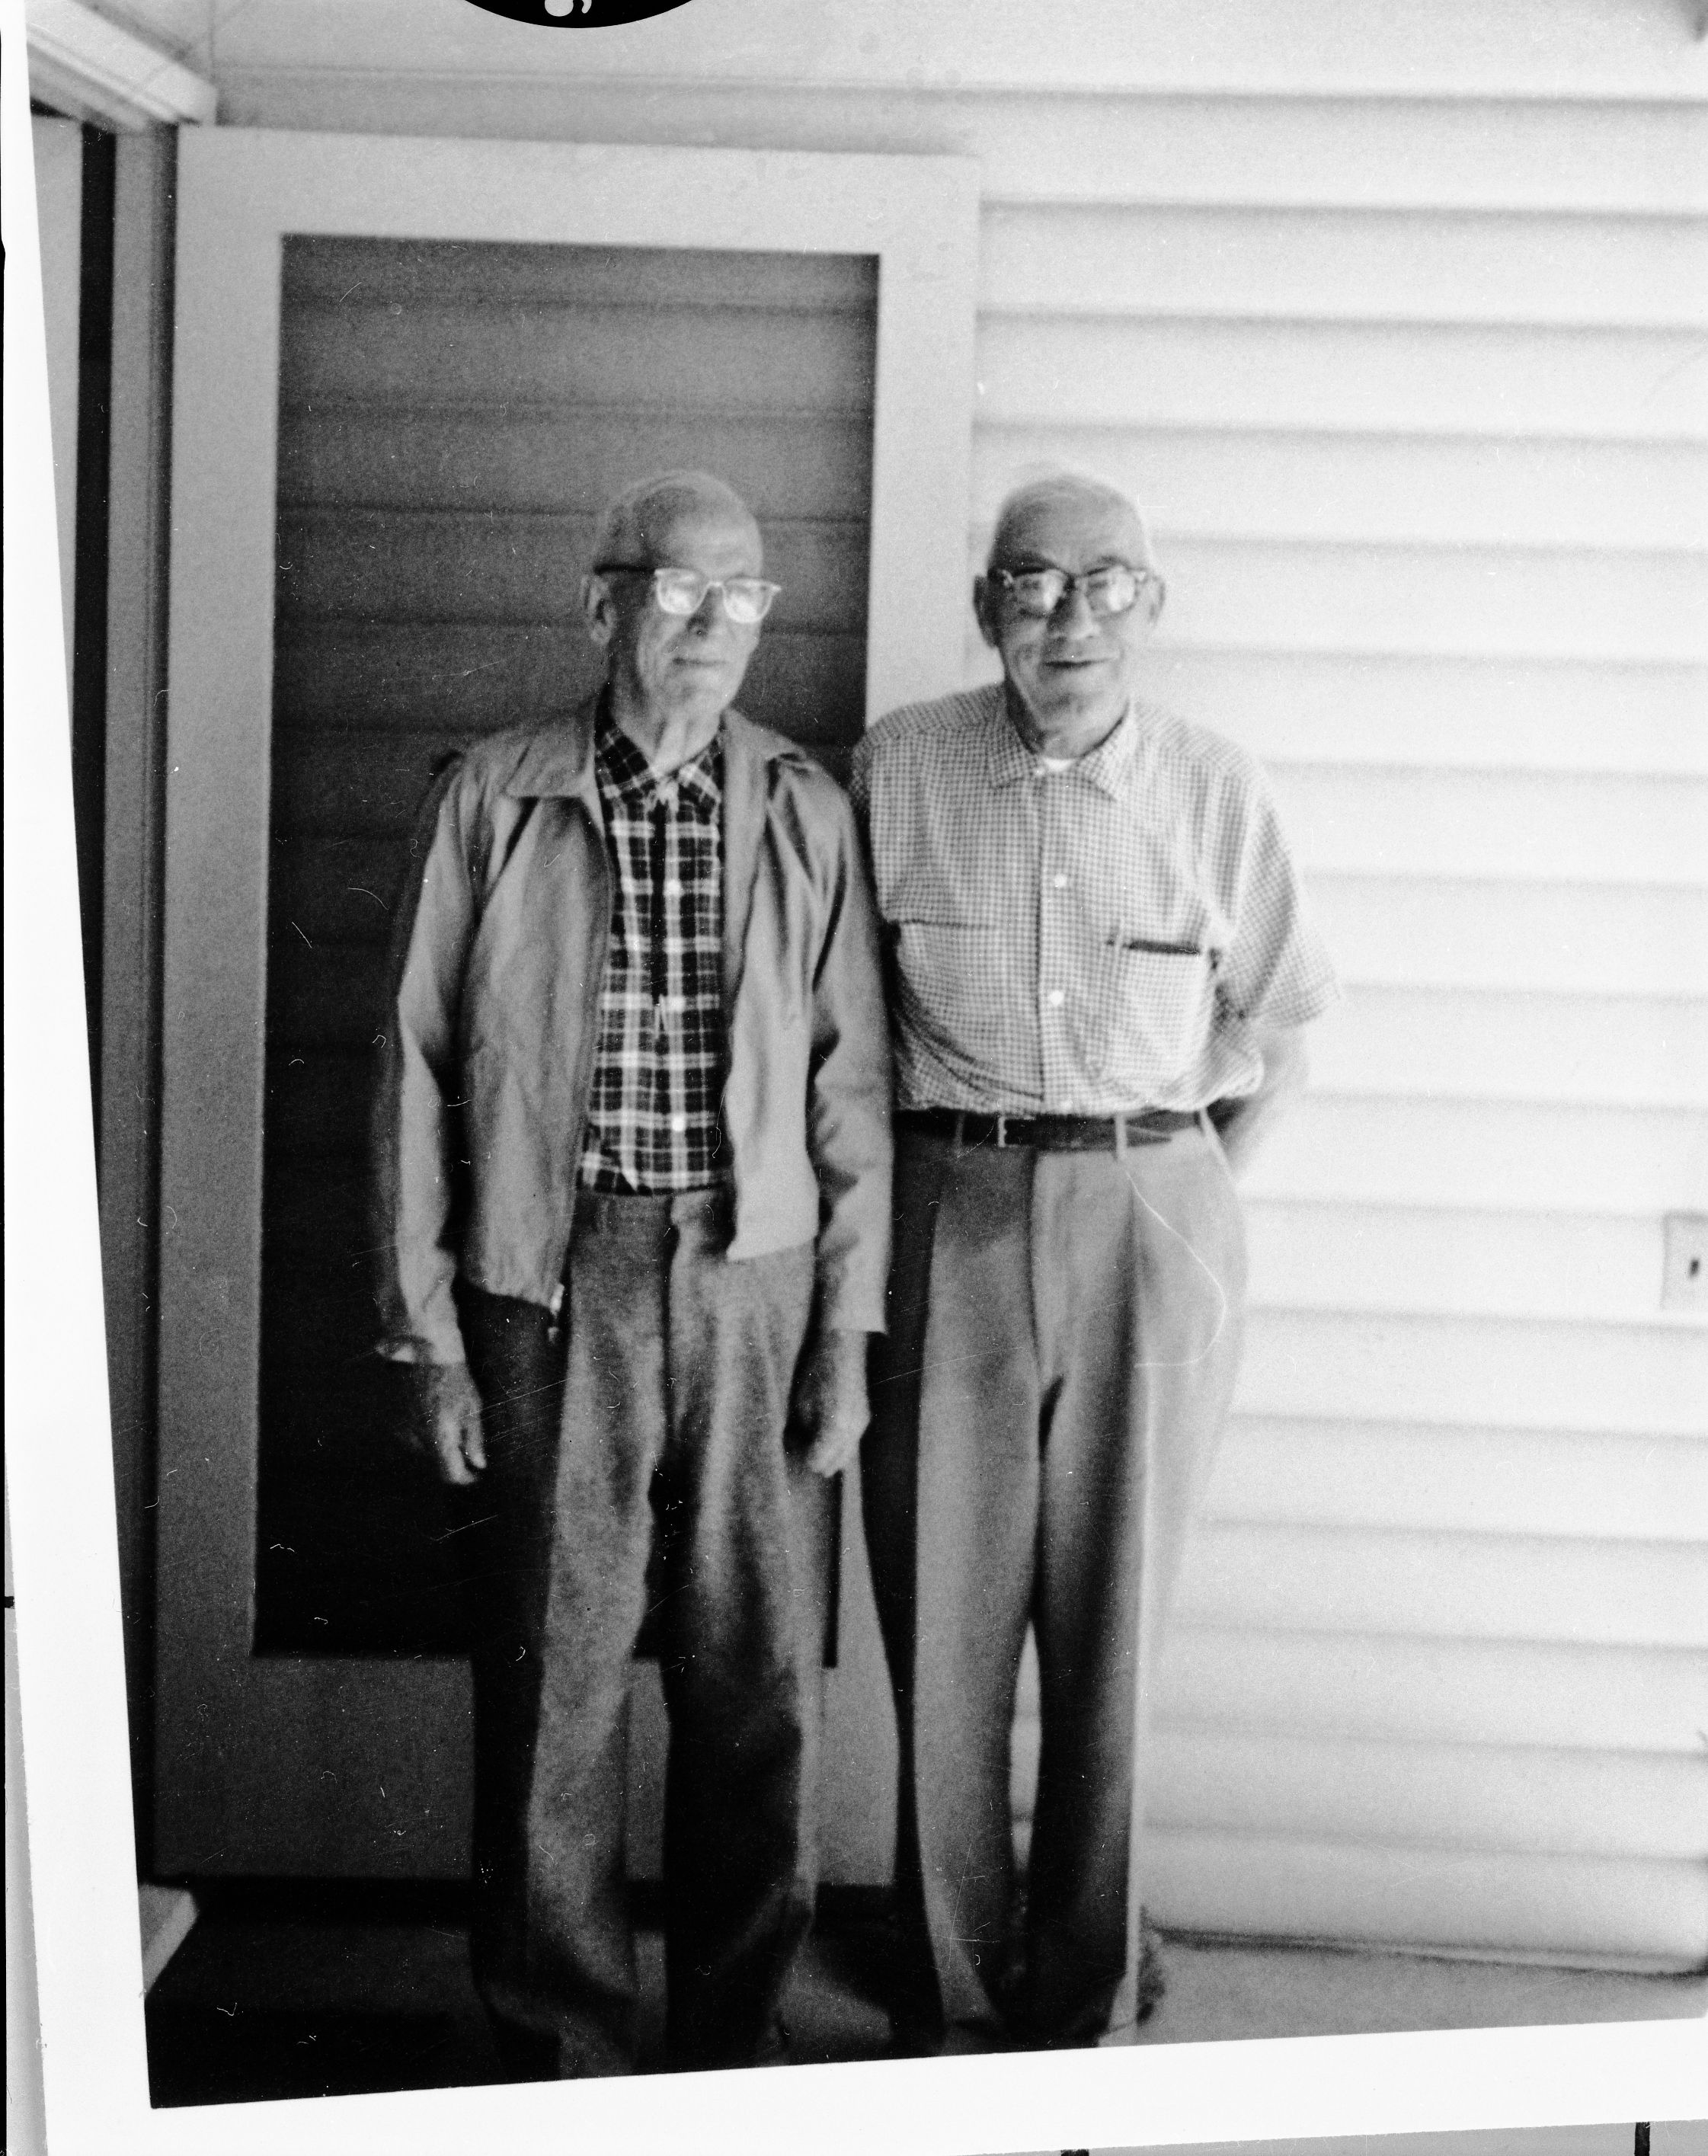 Phil & Will Gutlebin. The Gutlebin brothers (Daniel & Phil) were responsible for the Glacier Point Hotel (1917) Daniel was the architect & Phil the builder.